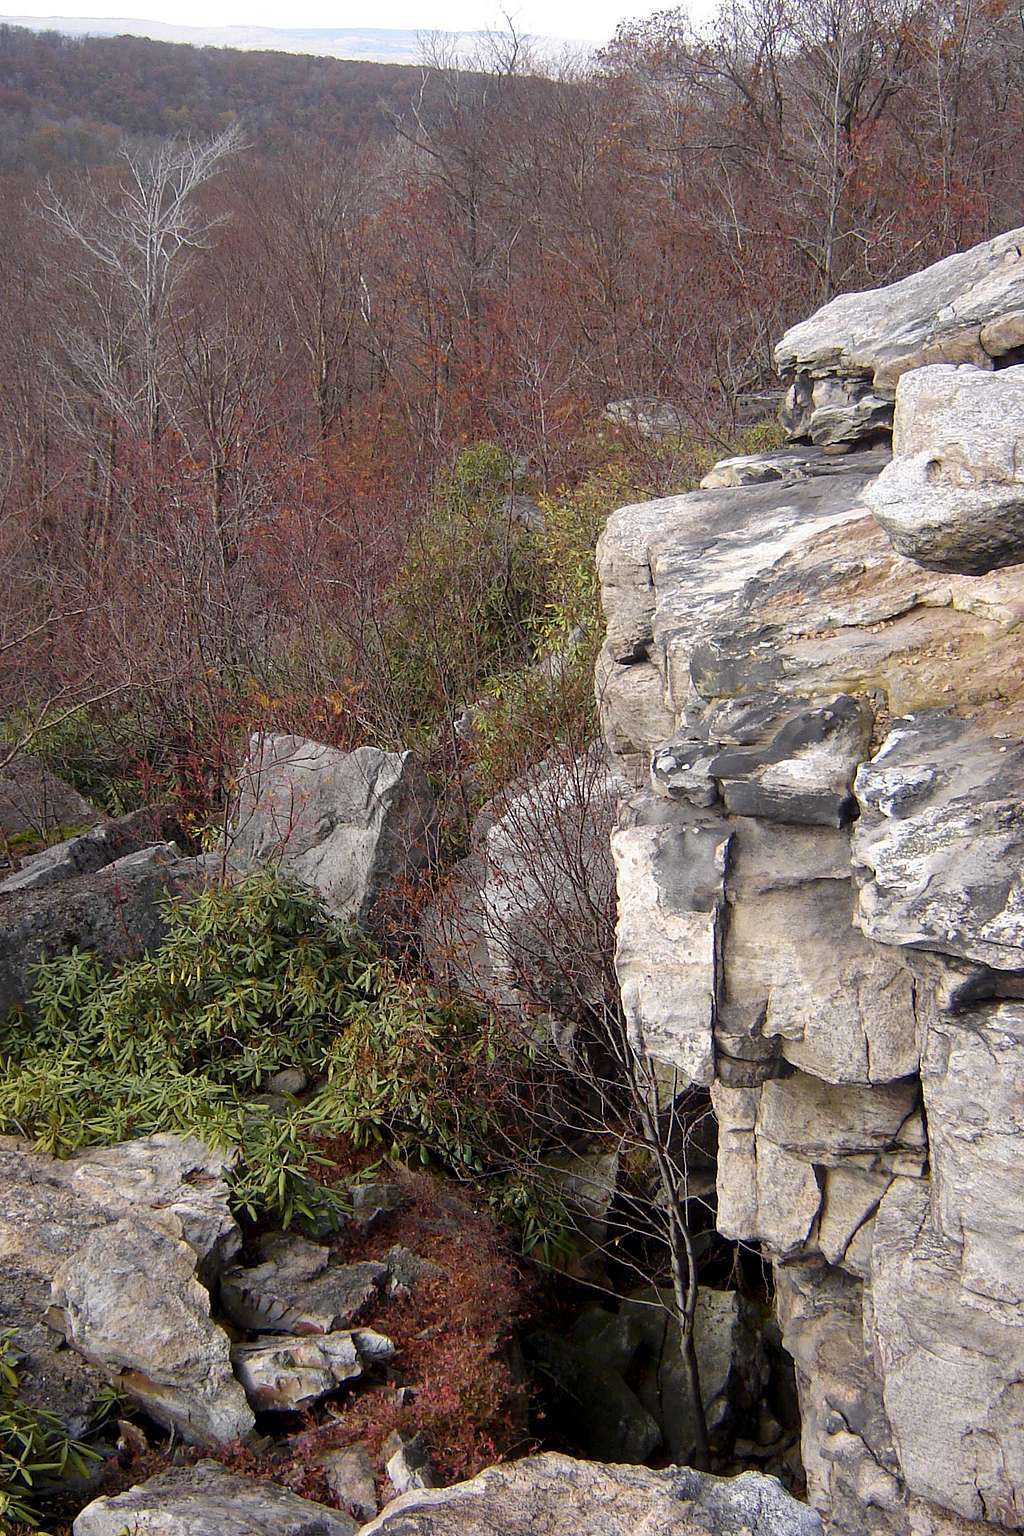 Looking down on the outcropping from on top